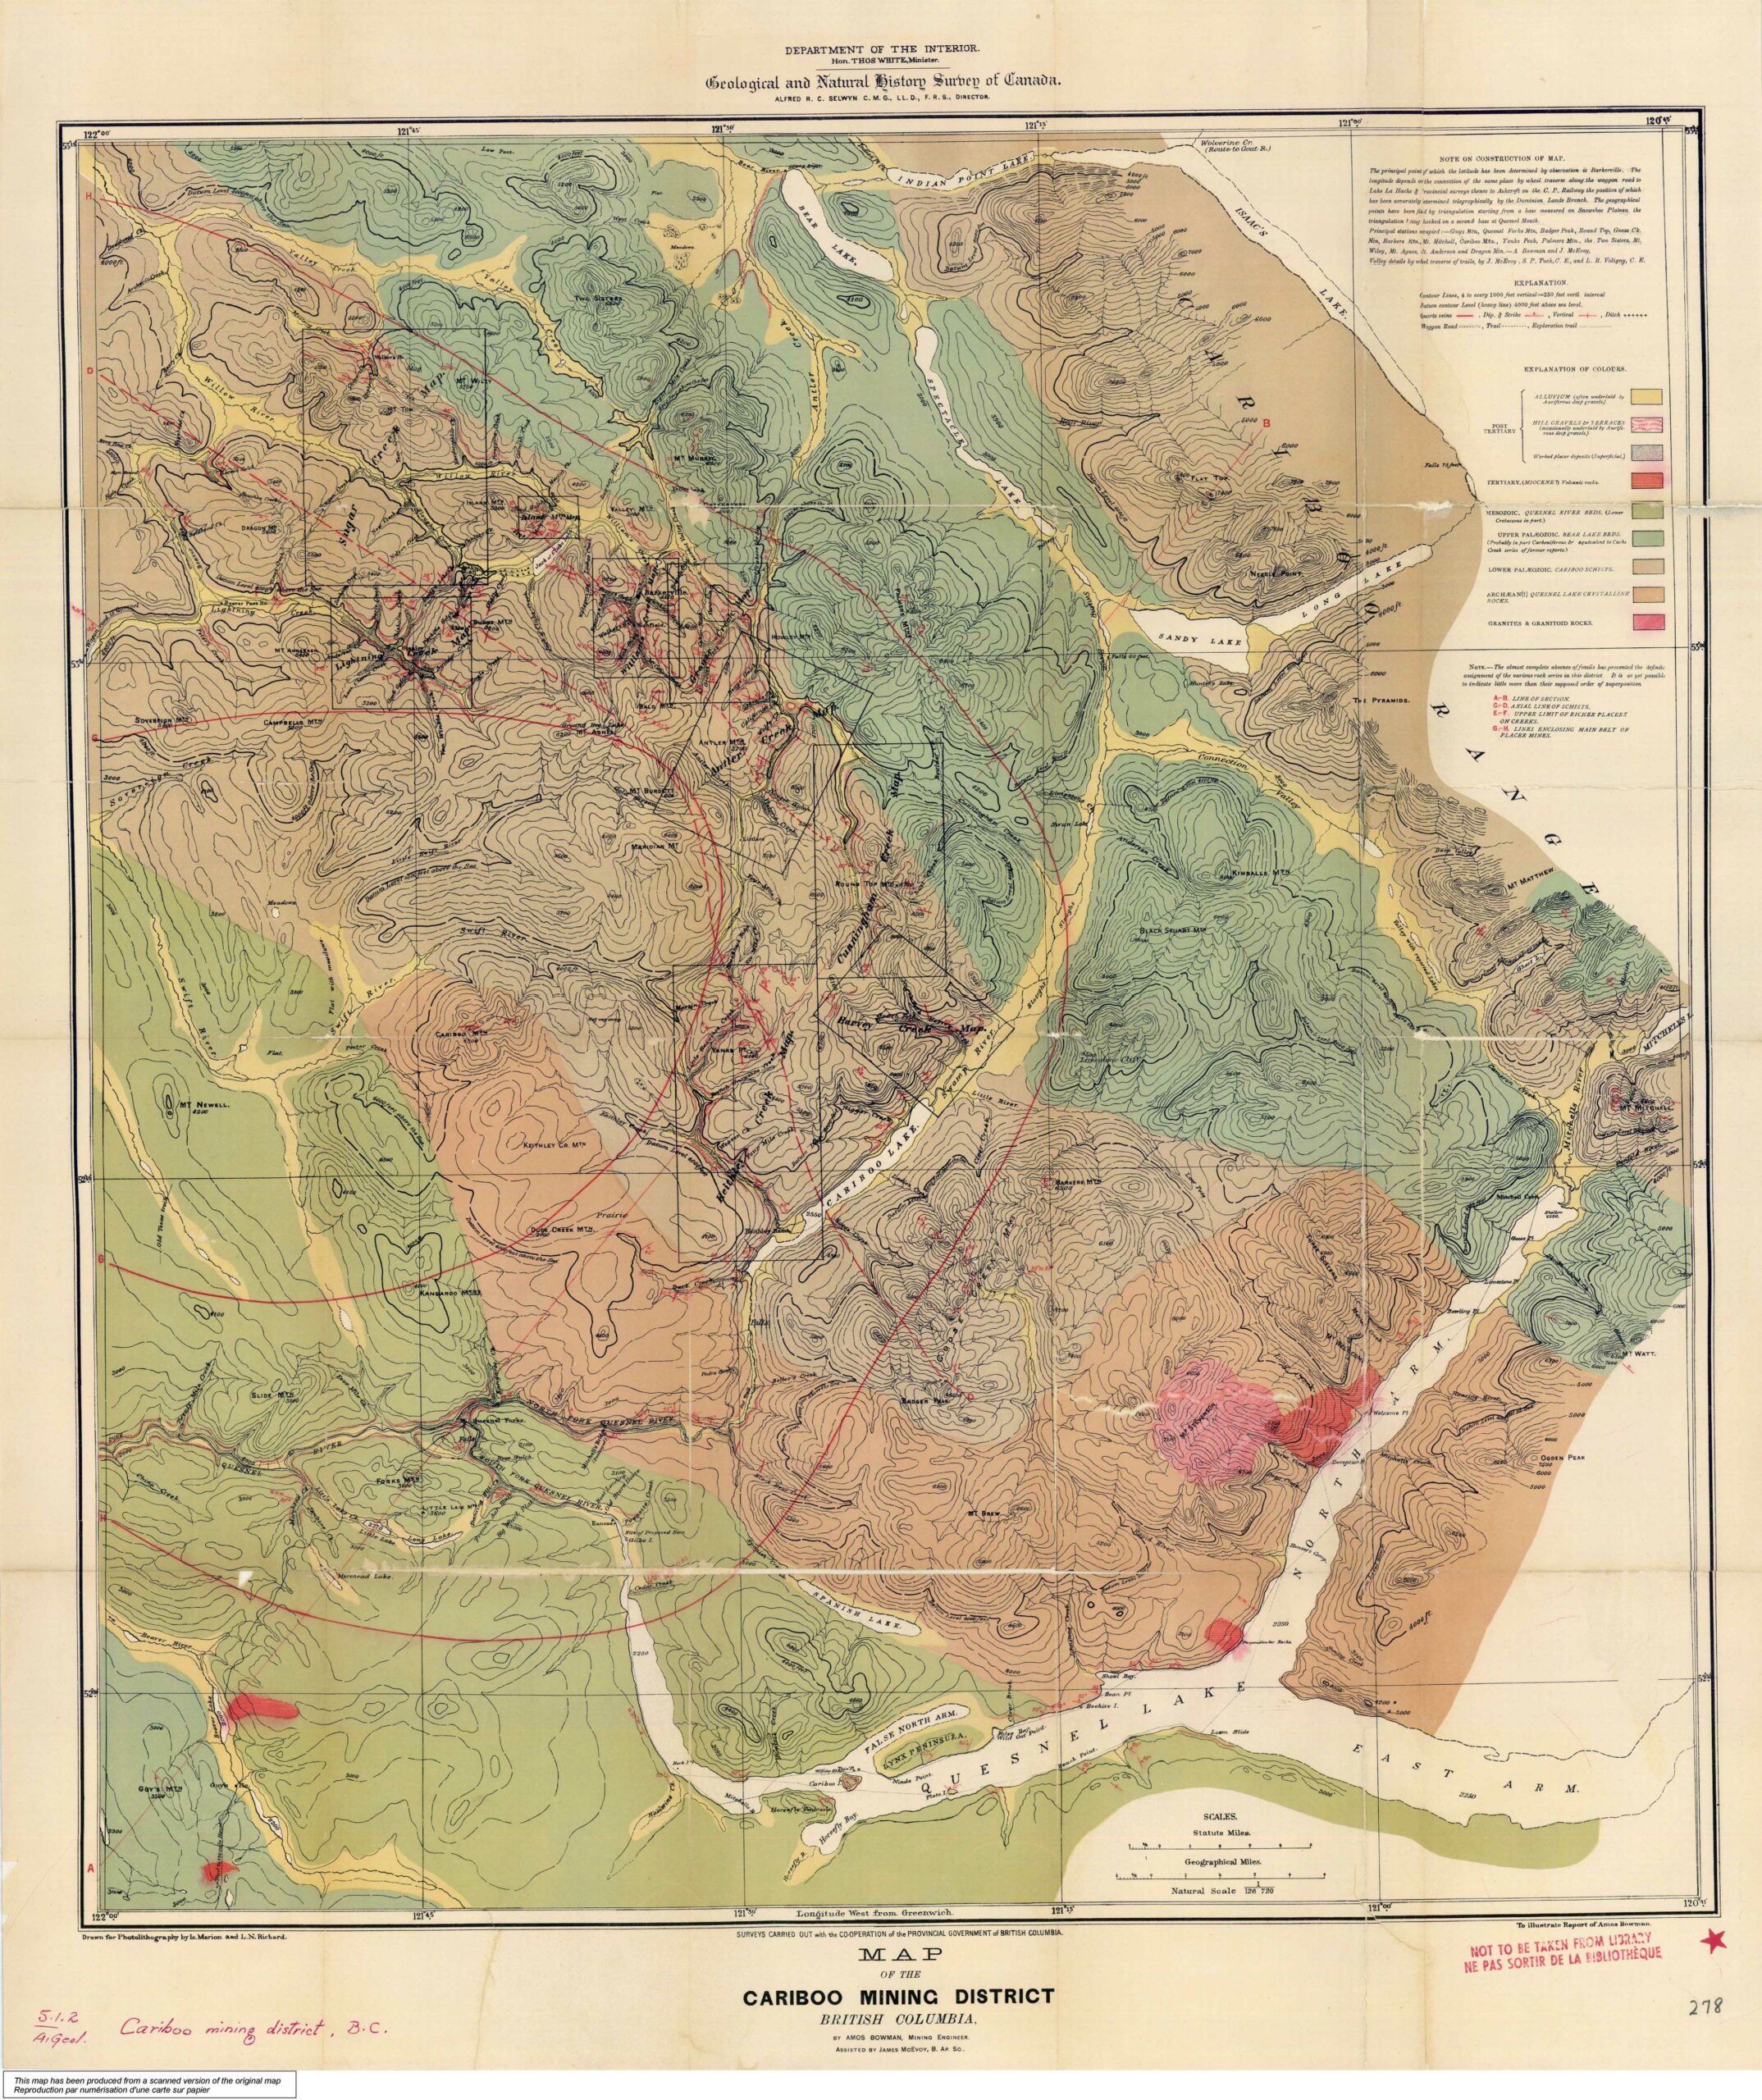 Map of the Cariboo Mining District to illustrate the report of Amos Bowman